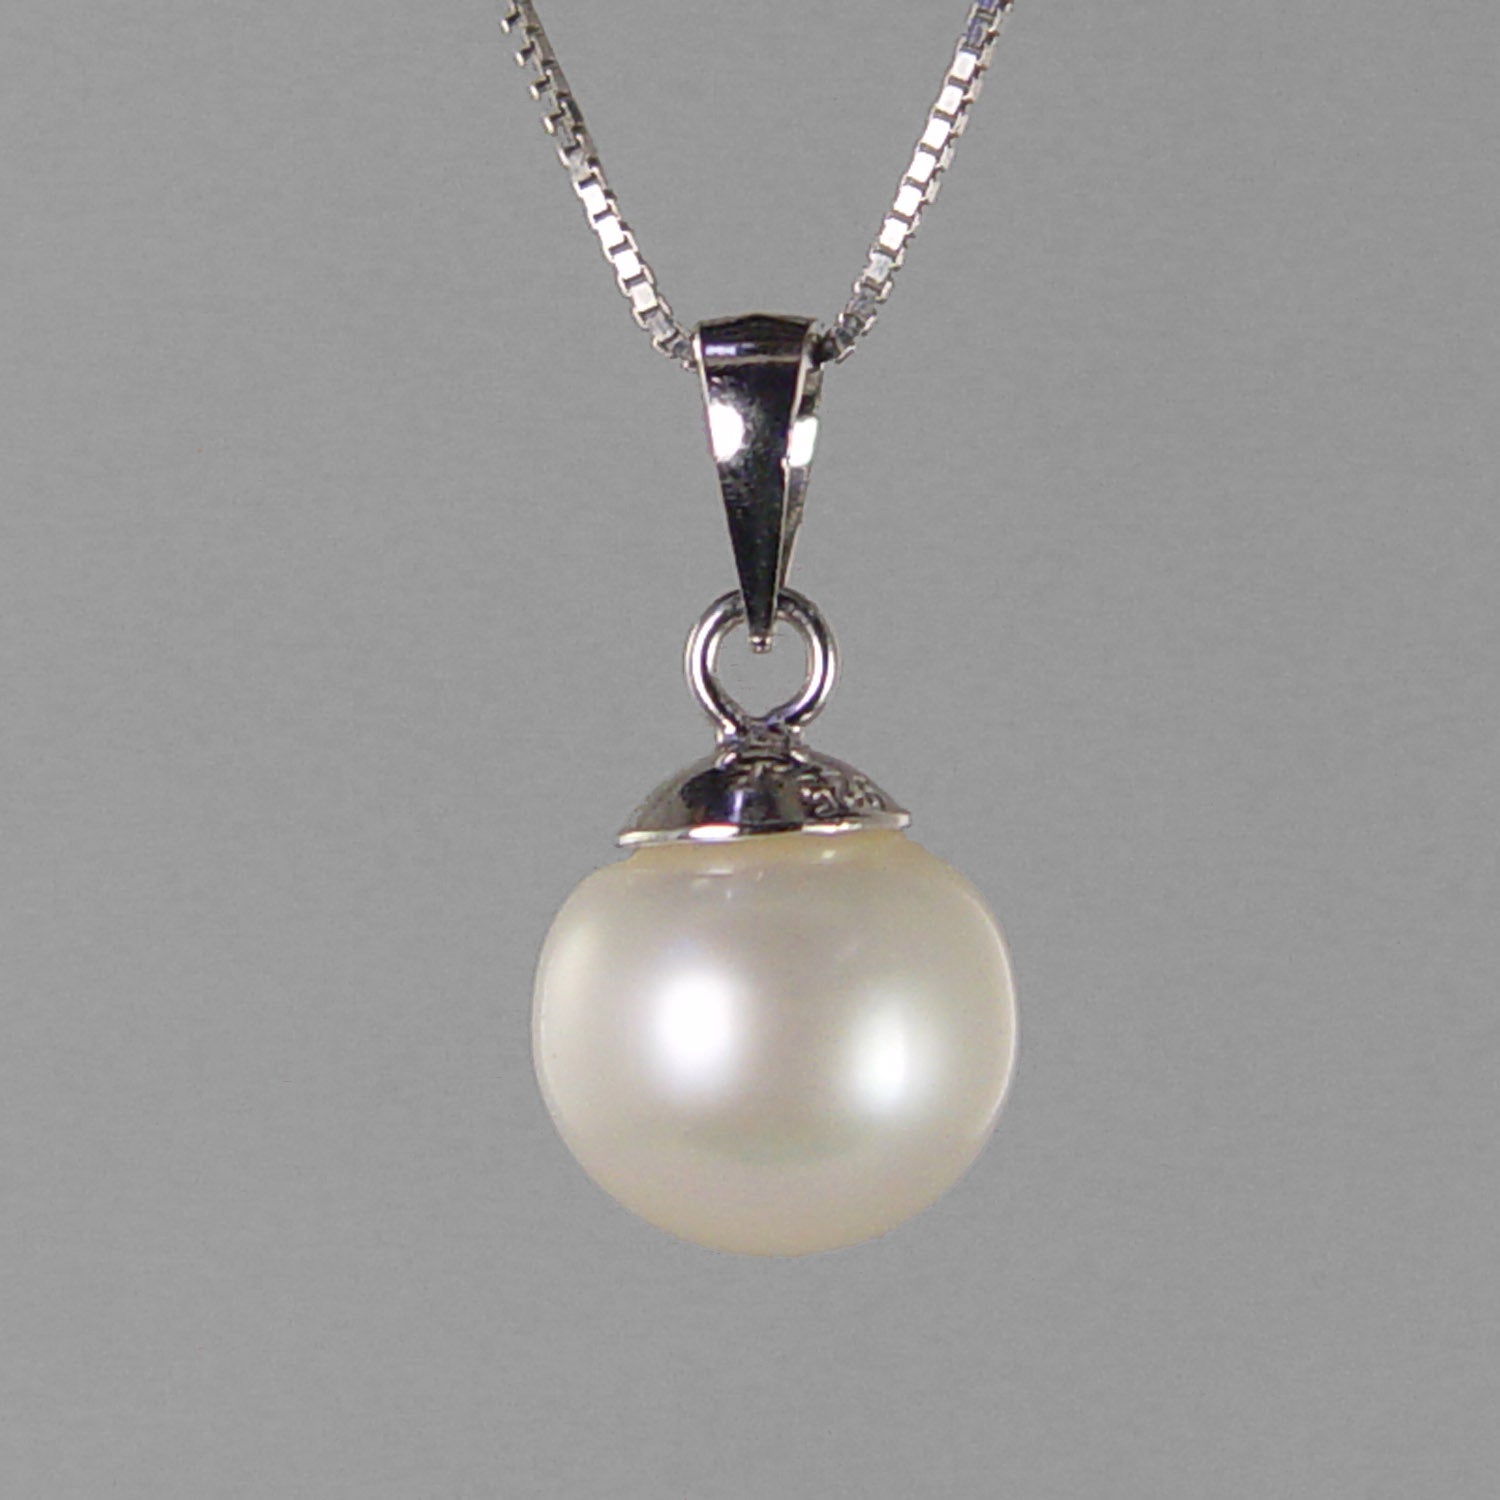 Pearl 6 ct 9.5 mm Round Freshwater Pearl With Sterling Silver Bail Pendant